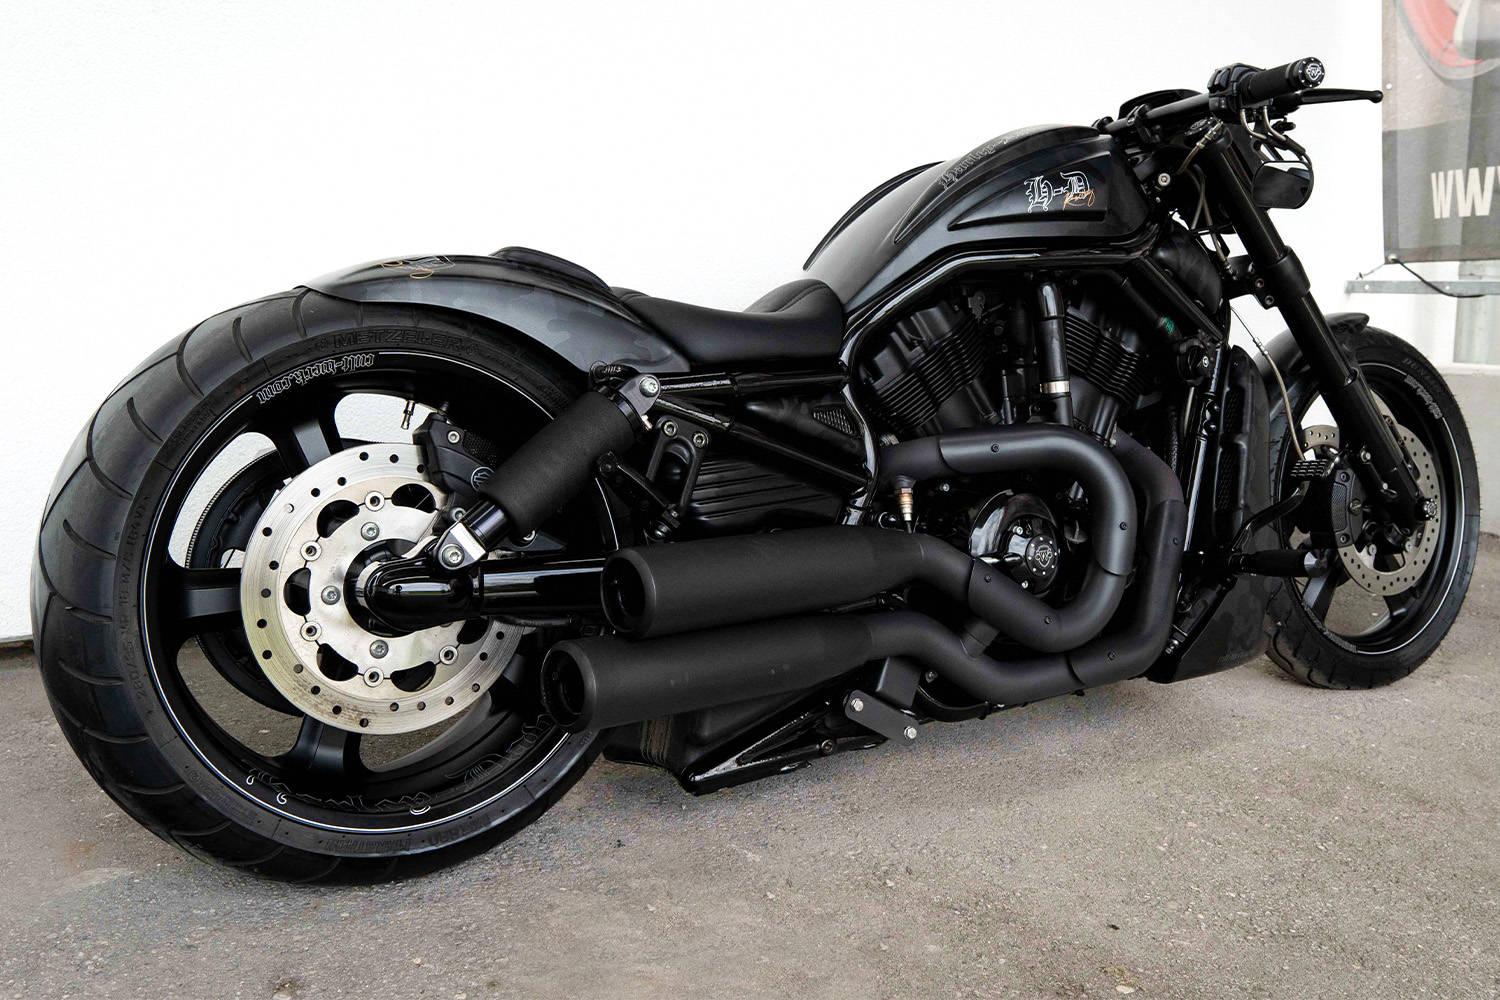 V-Rod Muscle - NRS Style Camouflage